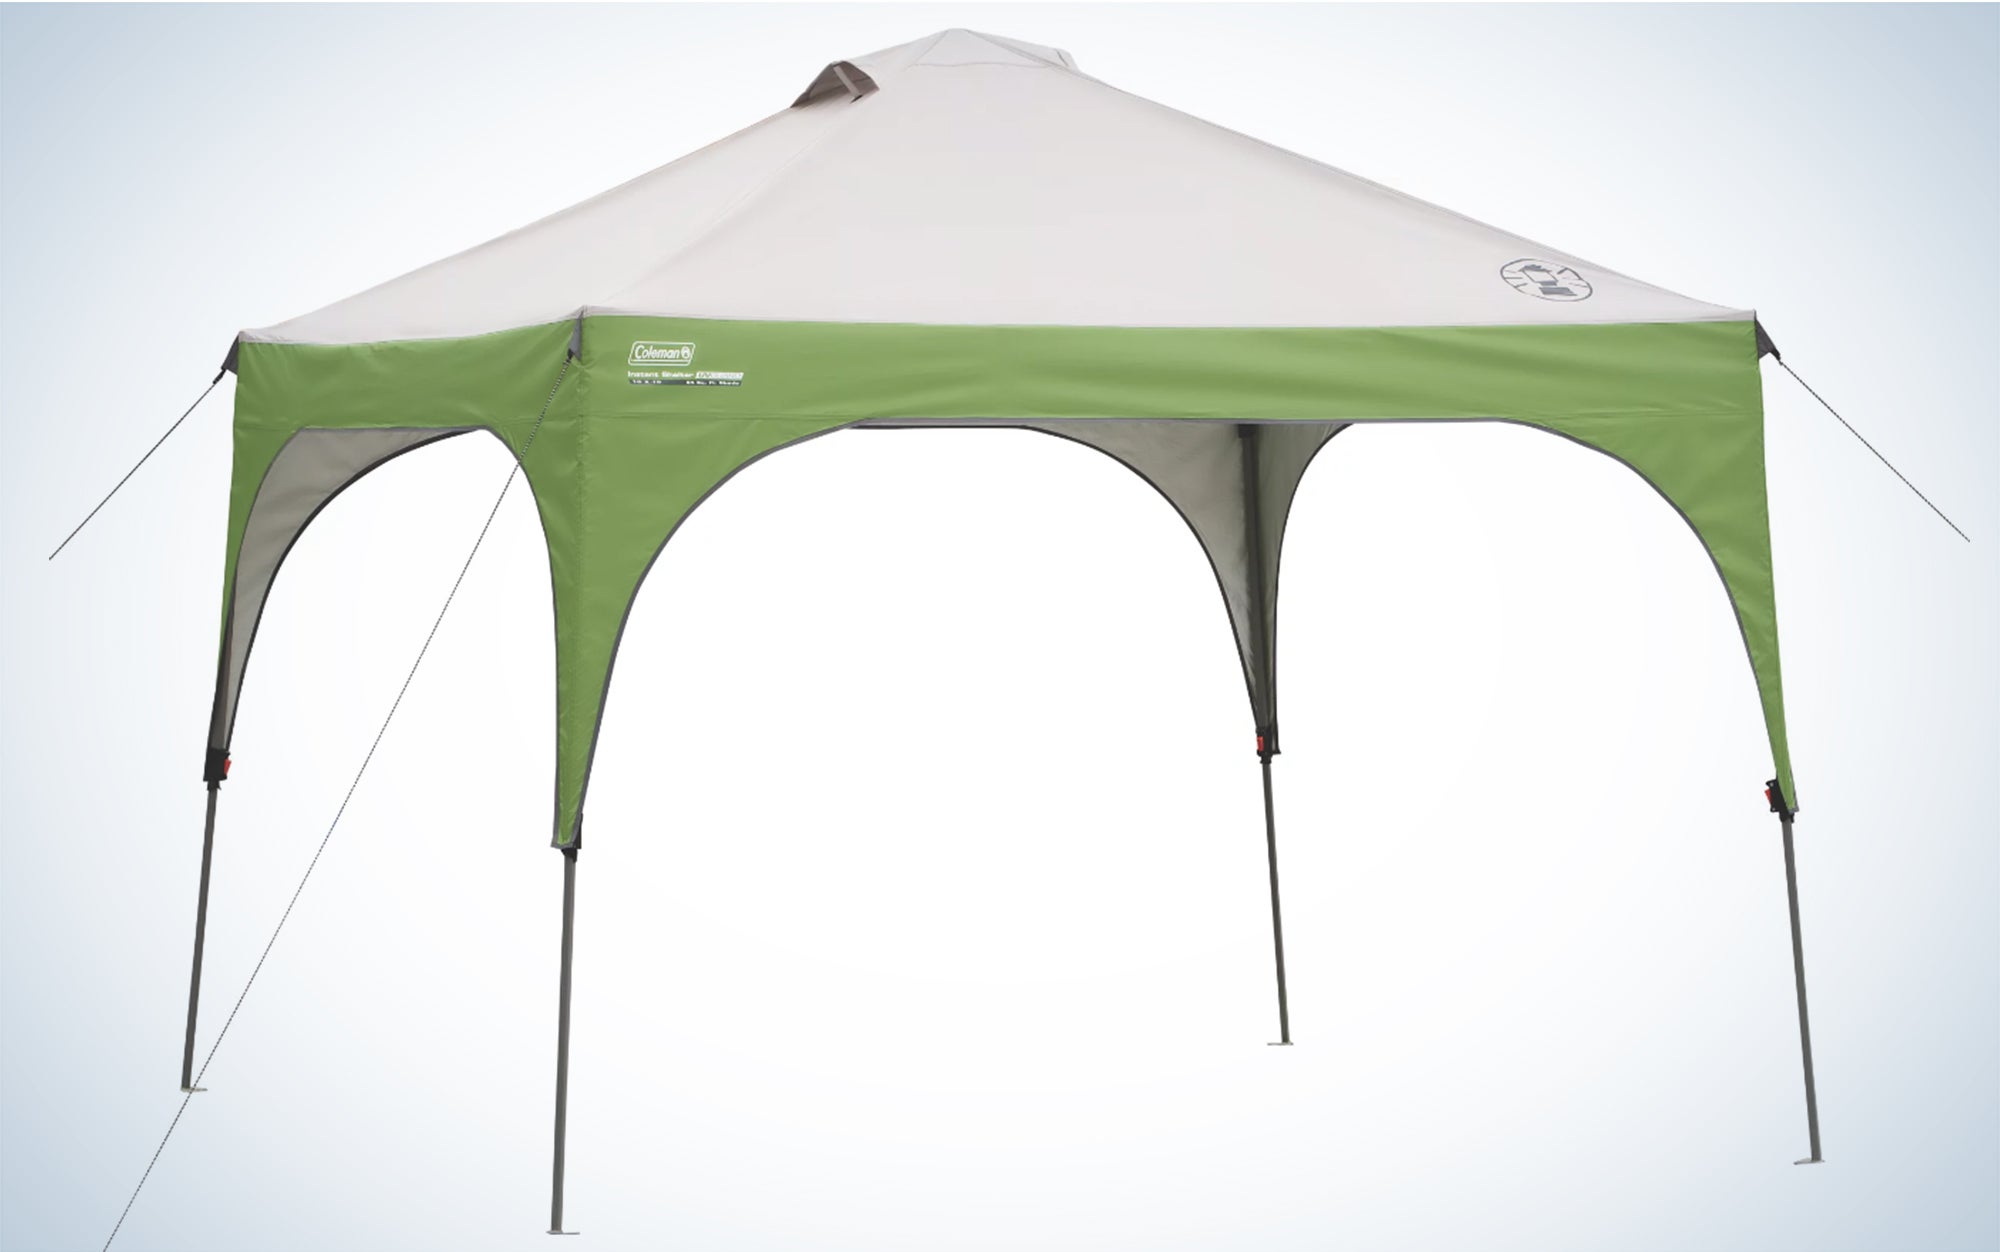 The Coleman Sun Shelter is one of the best canopy tents.